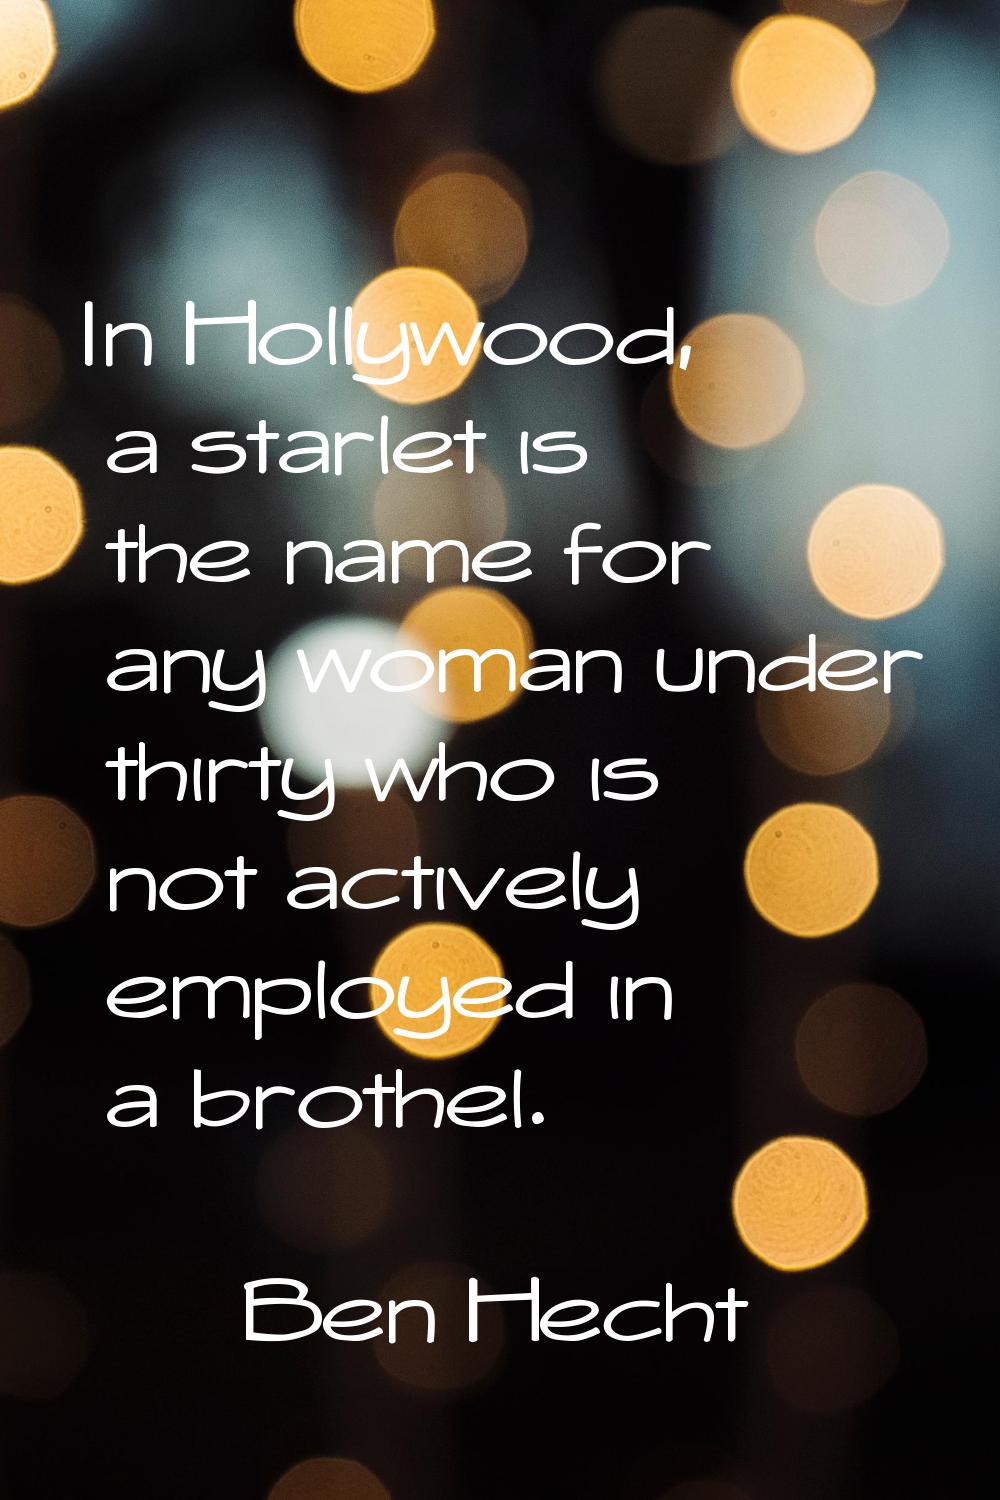 In Hollywood, a starlet is the name for any woman under thirty who is not actively employed in a br